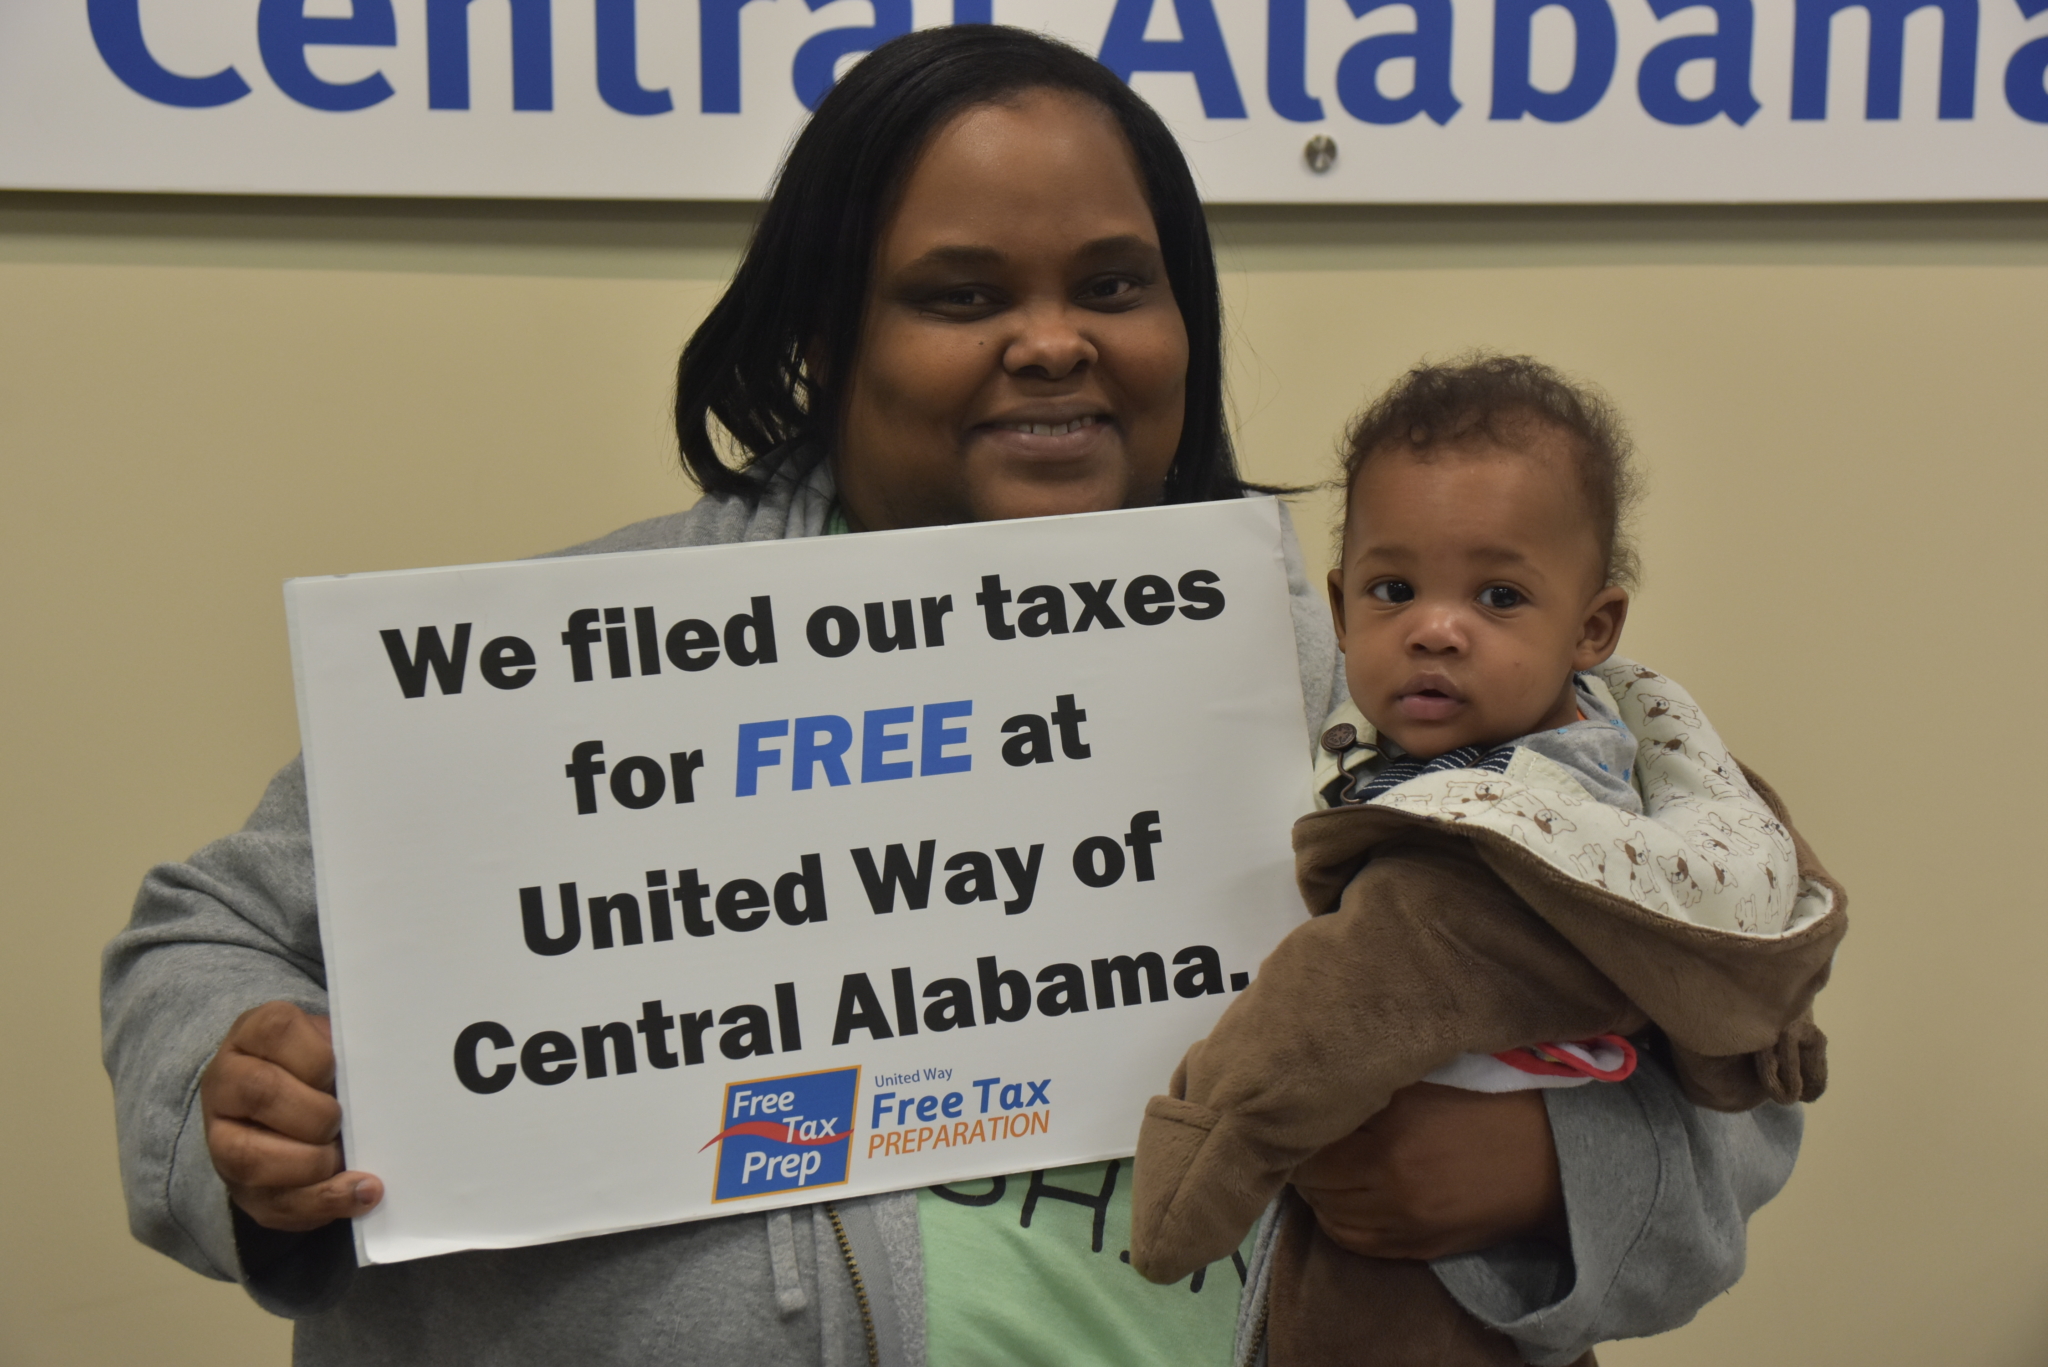 United Way Taxes 2 Did you know United Way offers FREE tax assistance? Make life easier with only a few steps